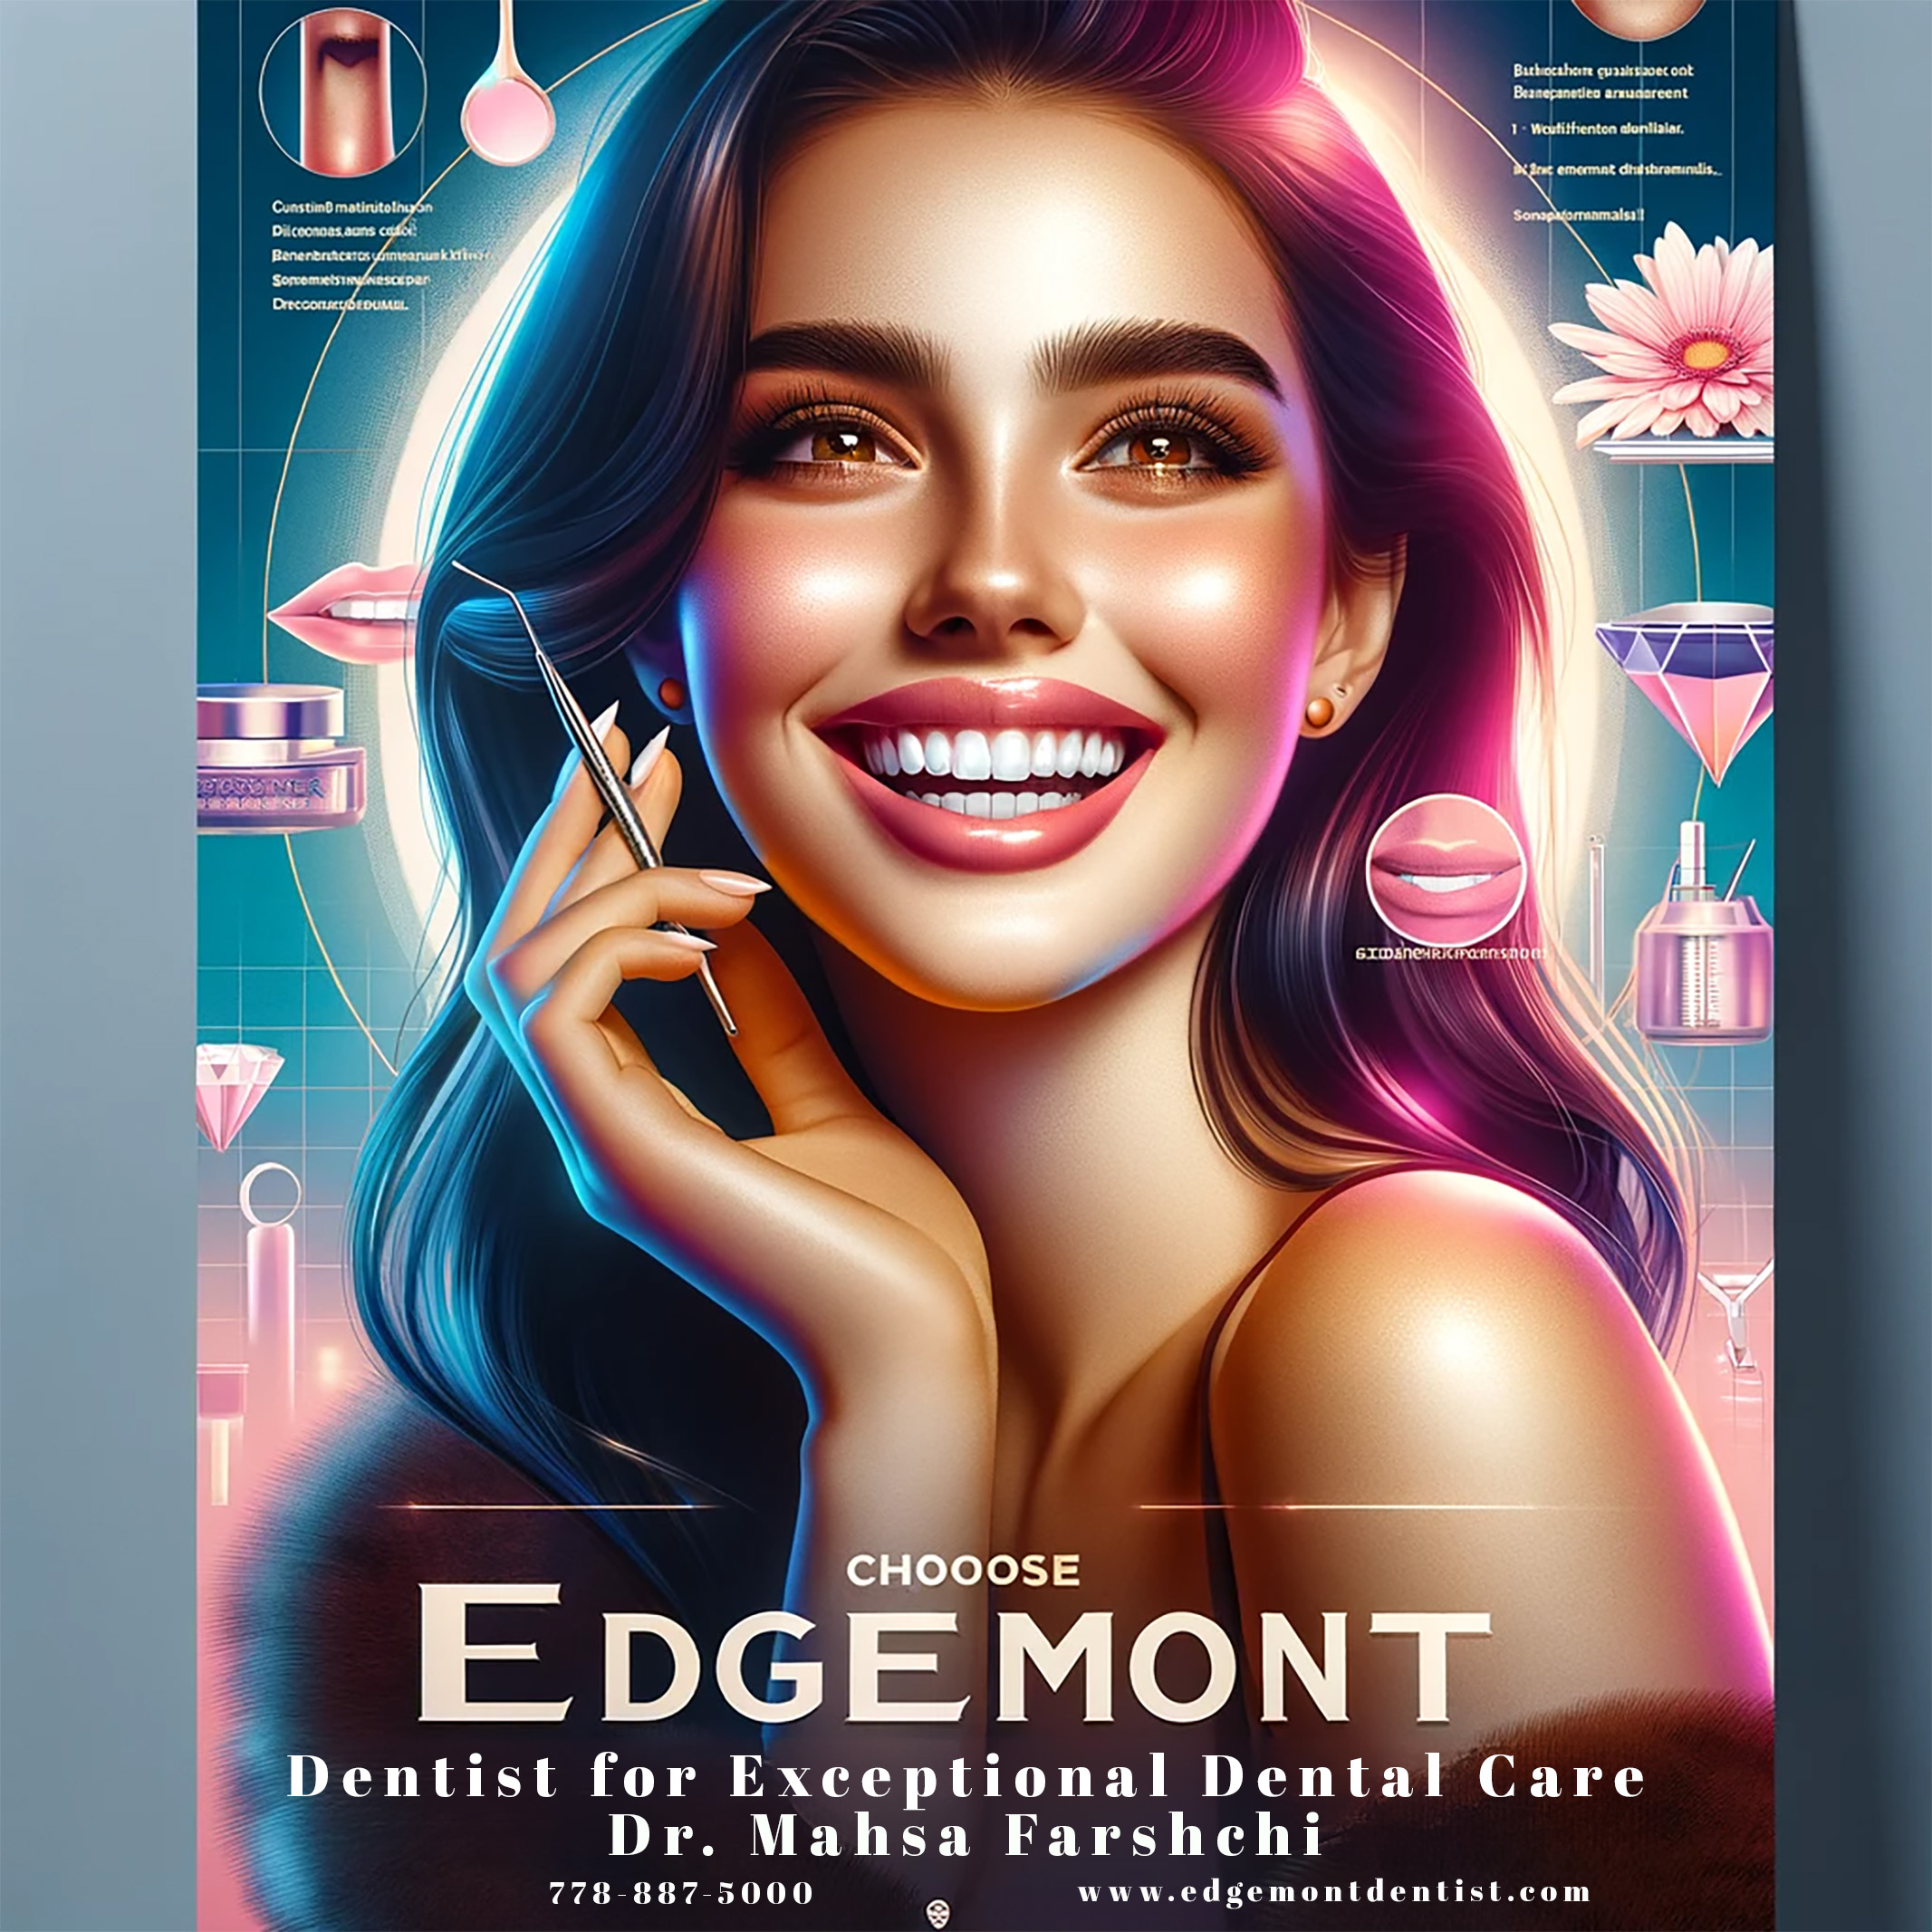 Choose Edgemont Dentist Dental Clinic for Exceptional Cosmetic Dental Care